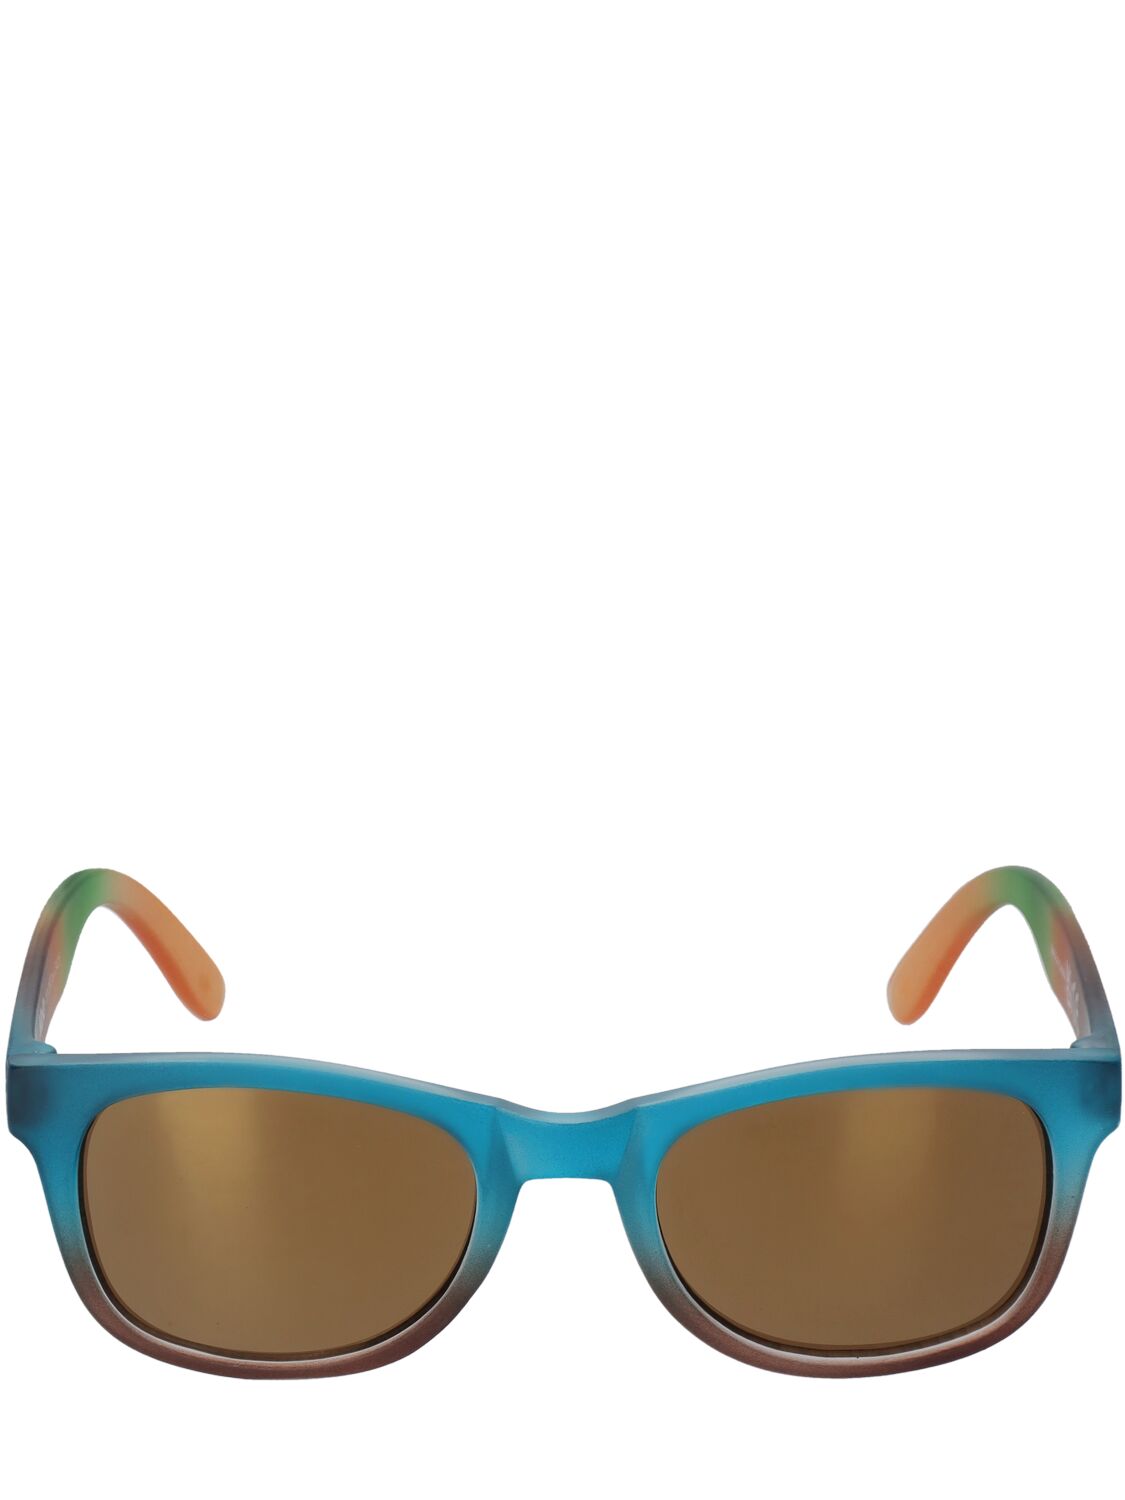 Image of Printed Polycarbonate Sunglasses